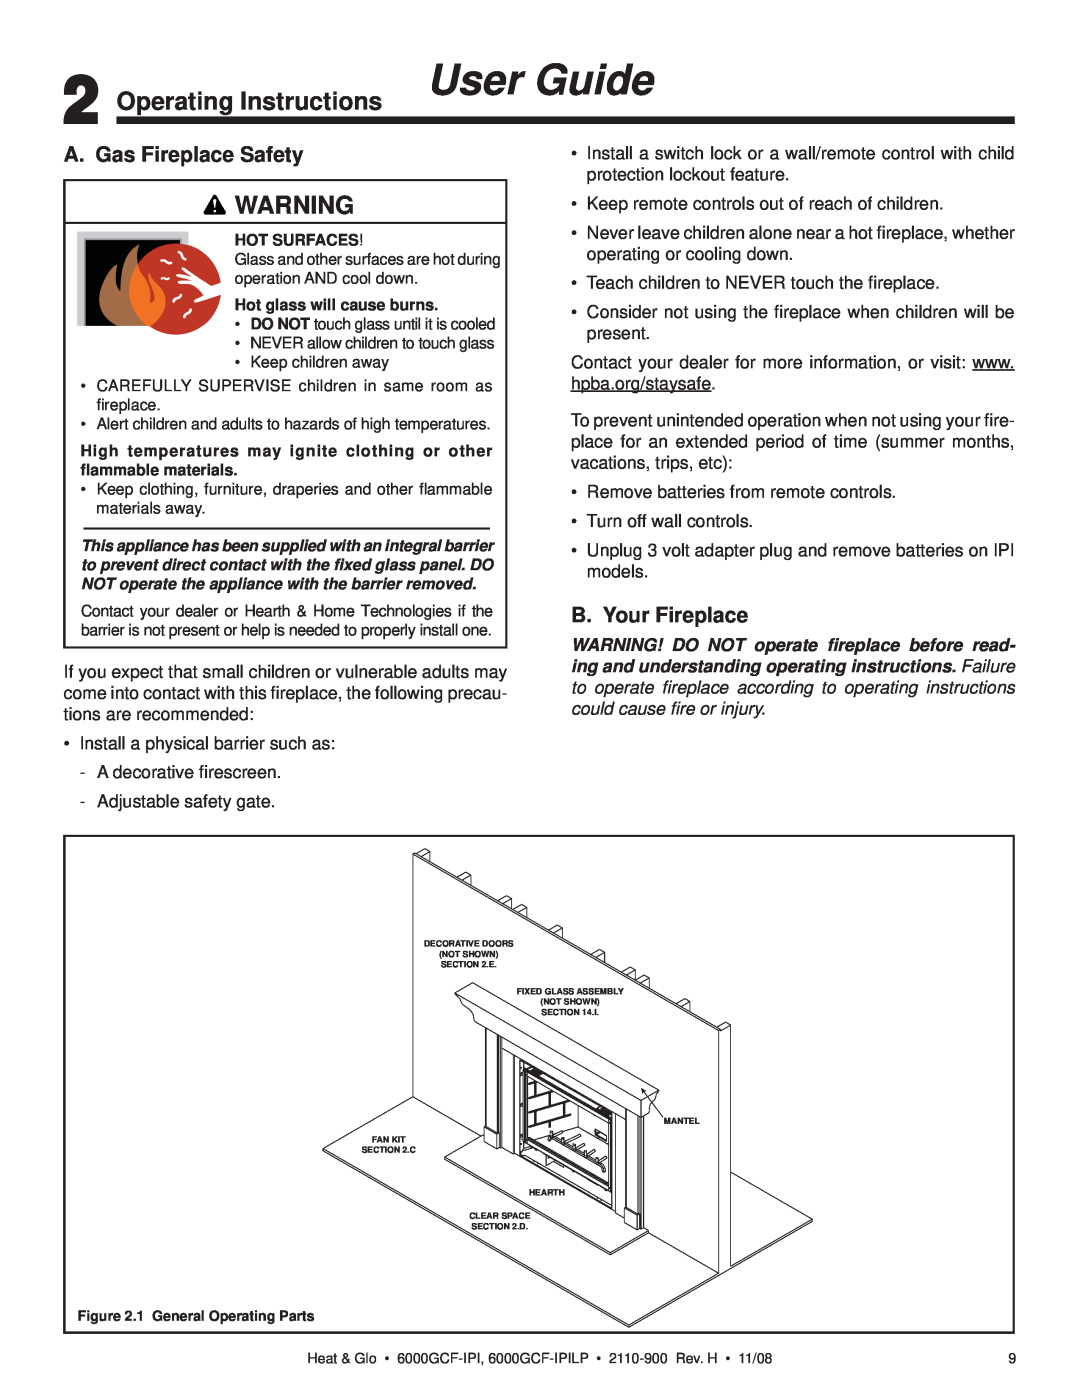 Hearth and Home Technologies 6000GCF-IPI Operating Instructions User Guide, A. Gas Fireplace Safety, B. Your Fireplace 